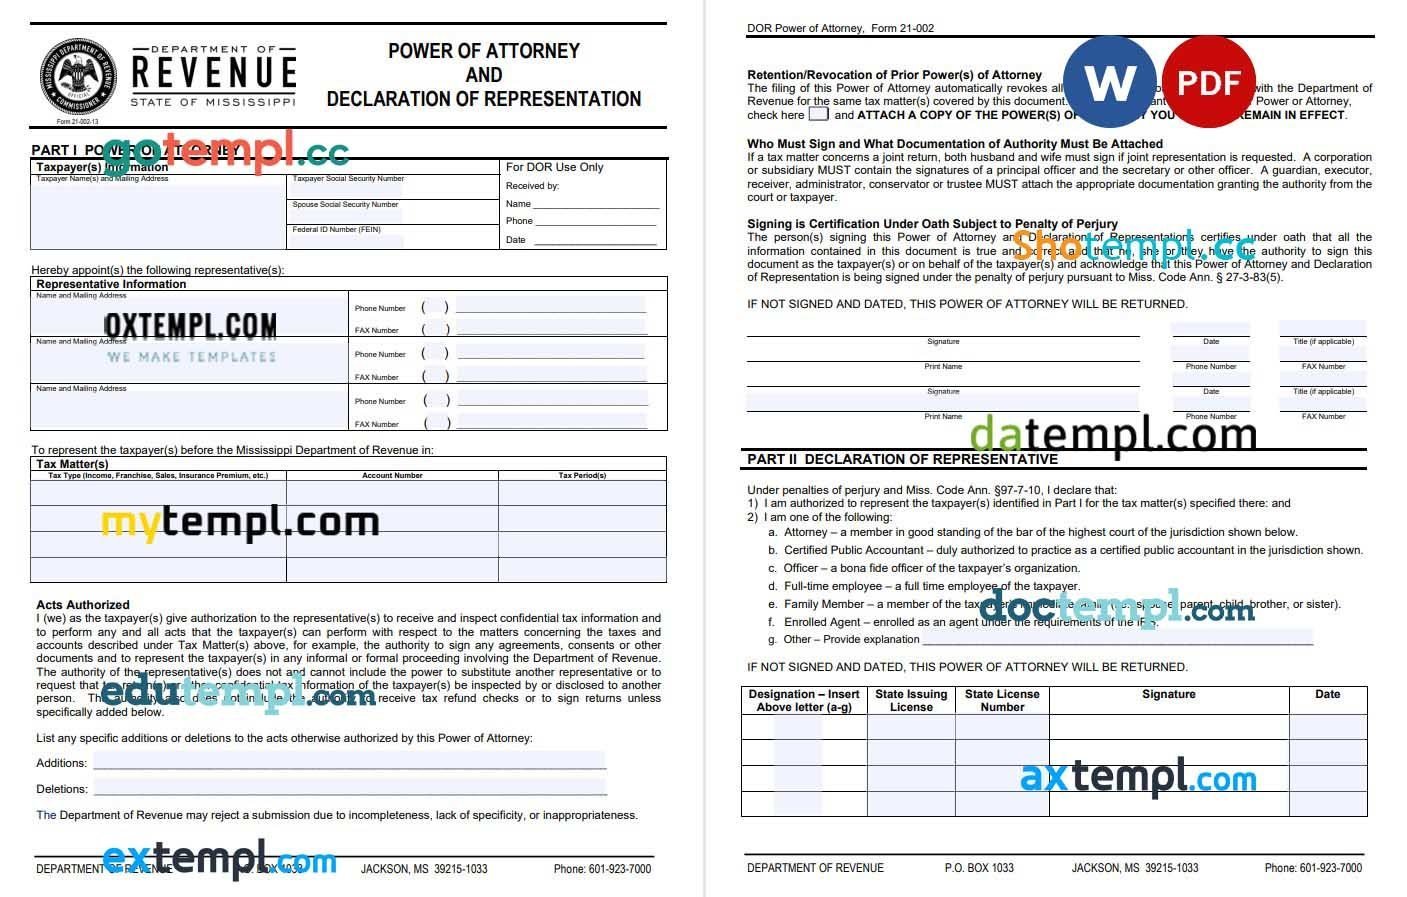 Mississippi Tax Power of Attorney Form example, fully editable